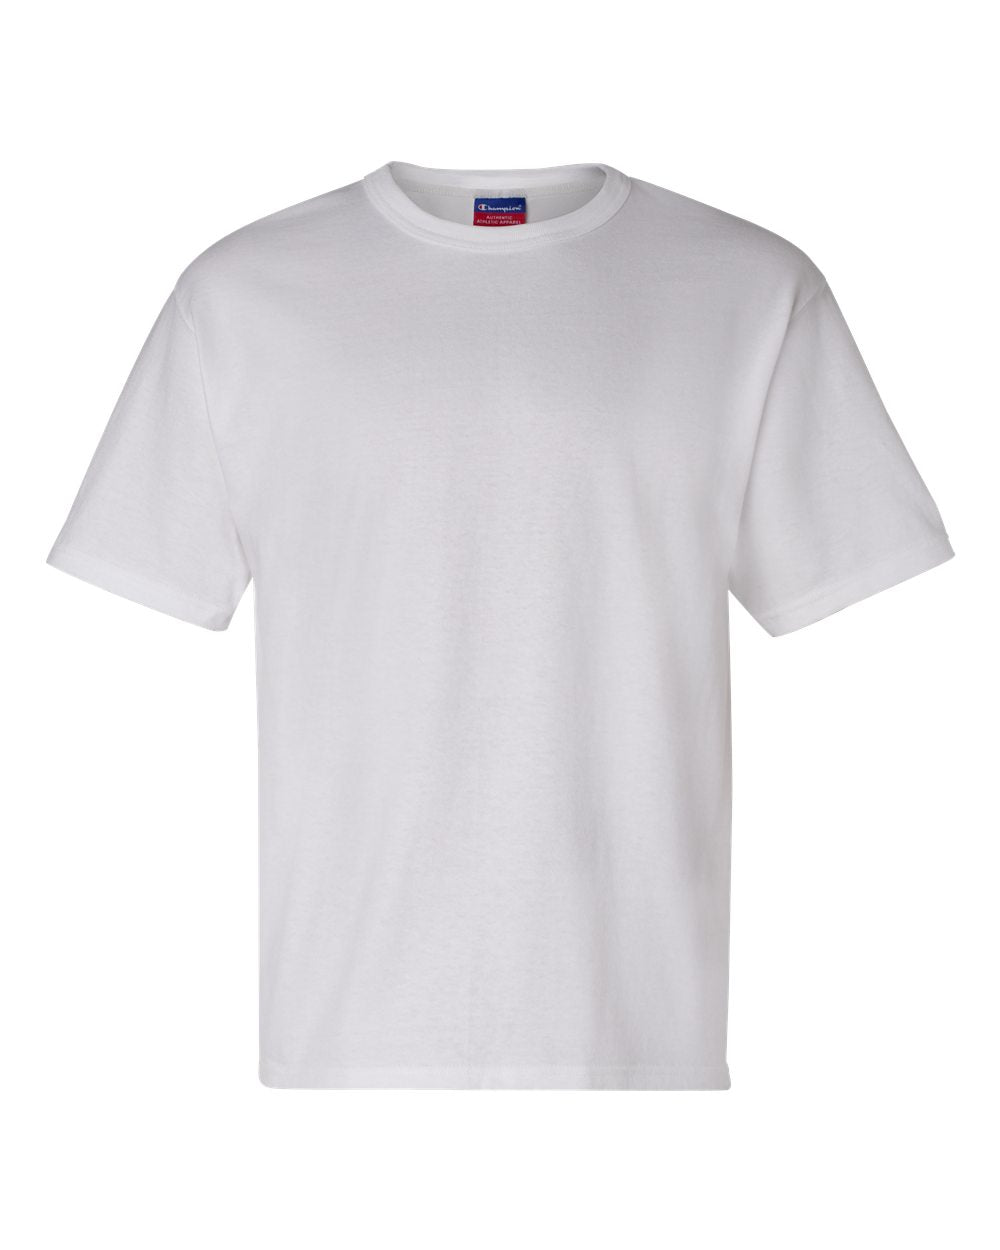 Champion Heritage Jersey T-Shirt T105 #color_White